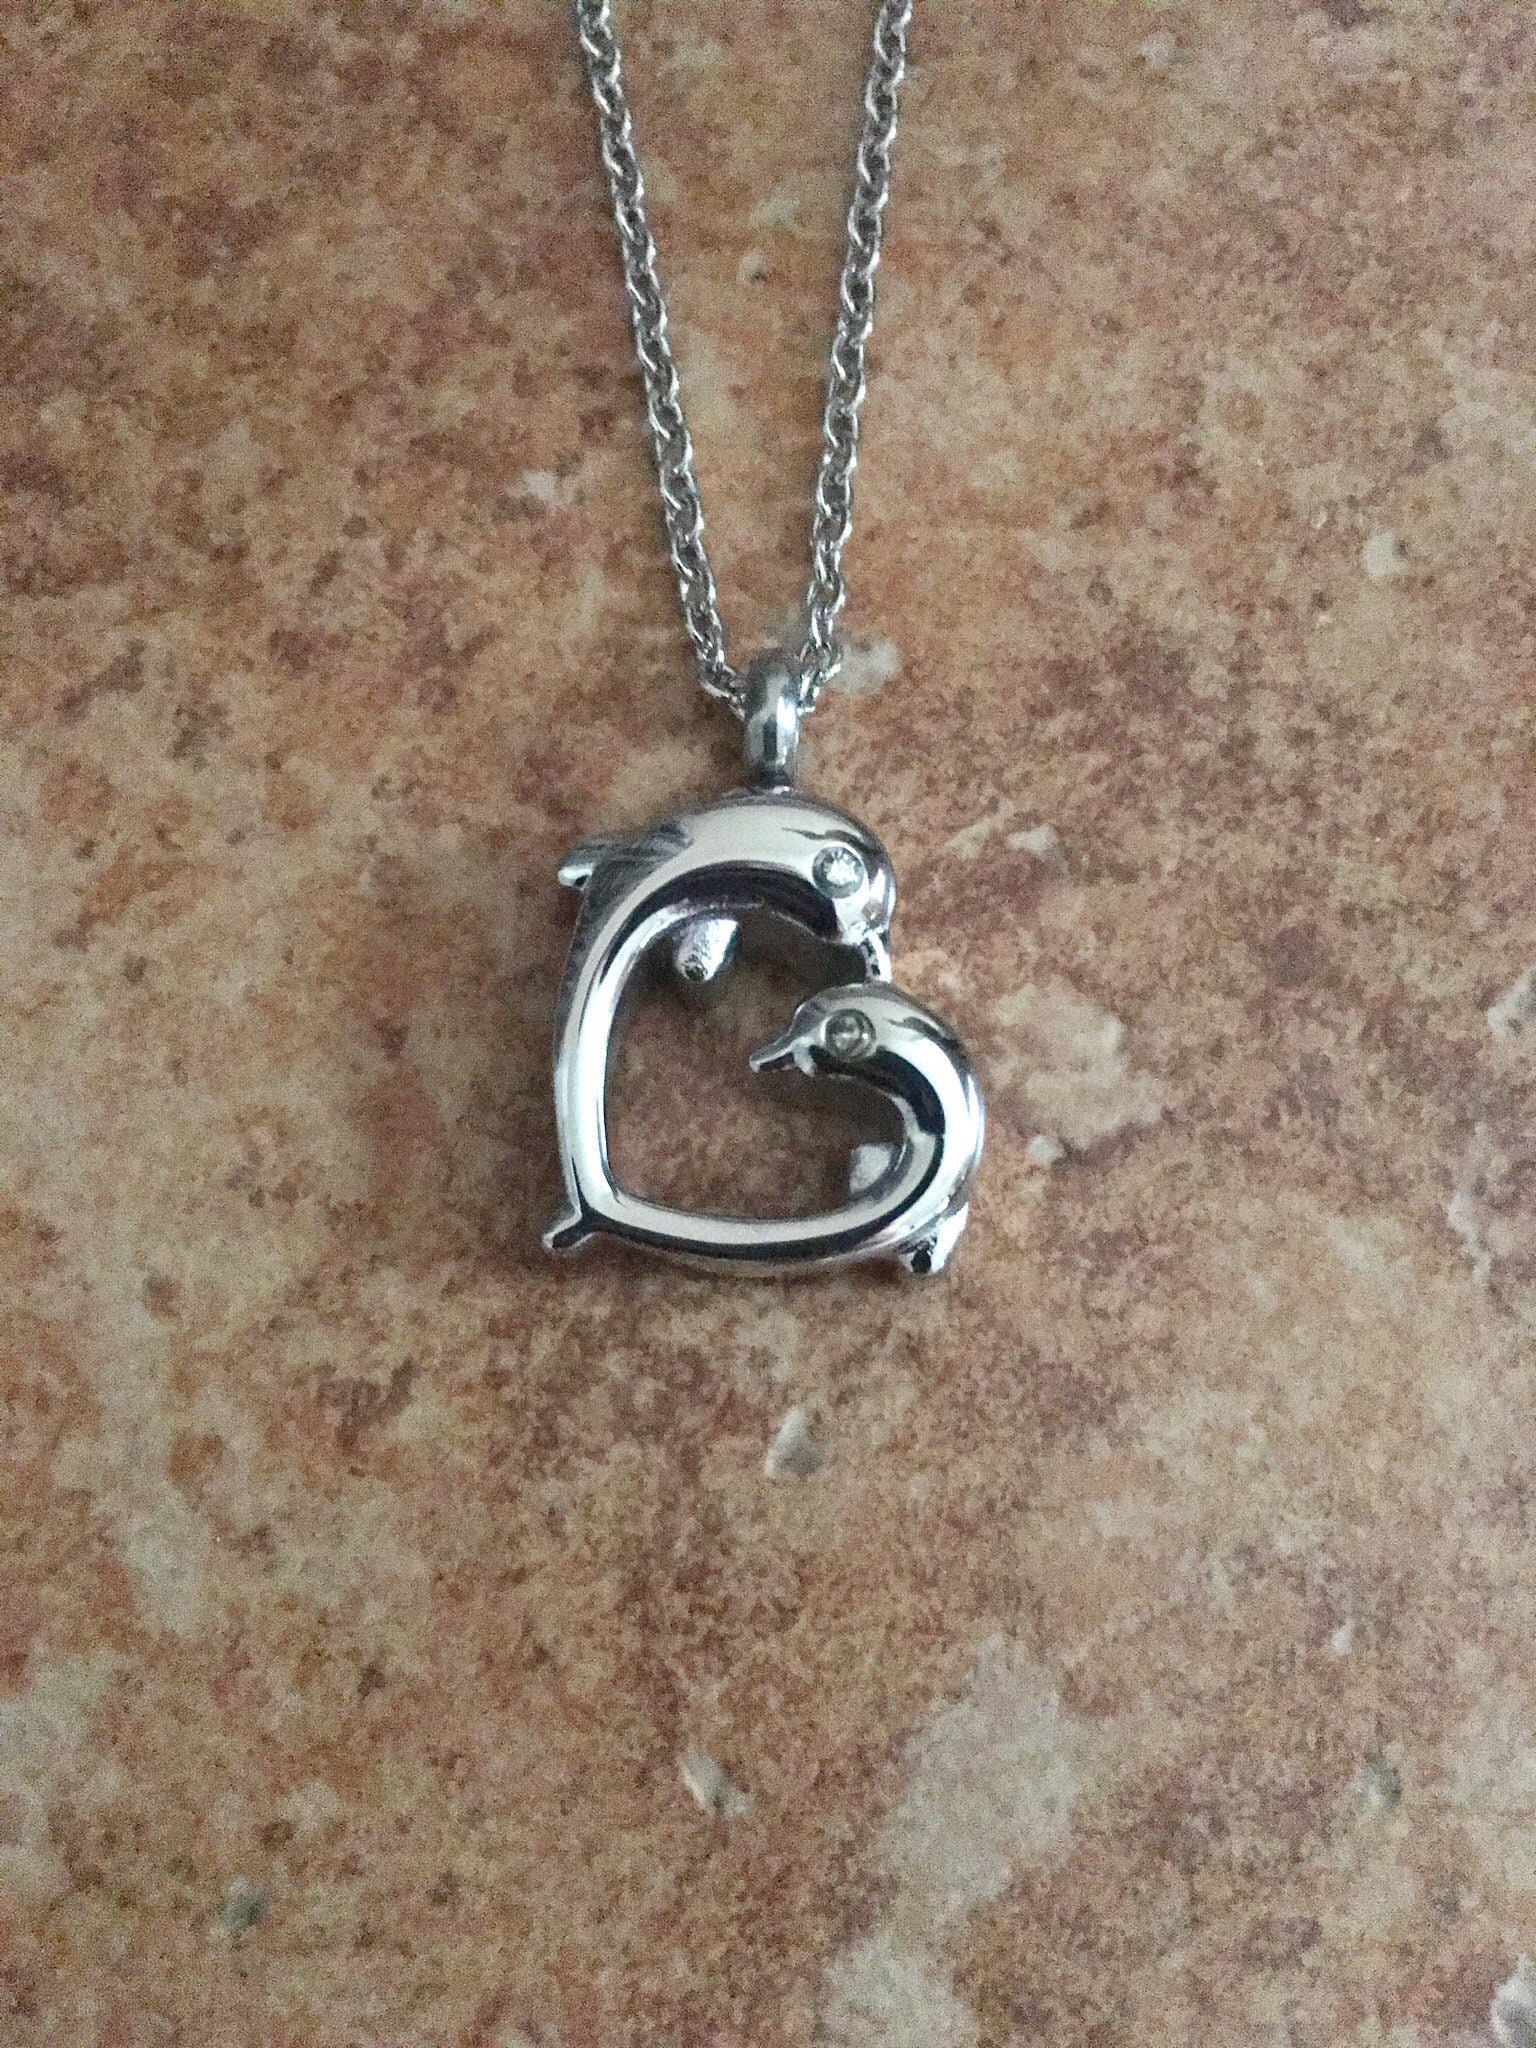 Stainless Steel Cremation Jewelry Two Dolphin Heart | Etsy